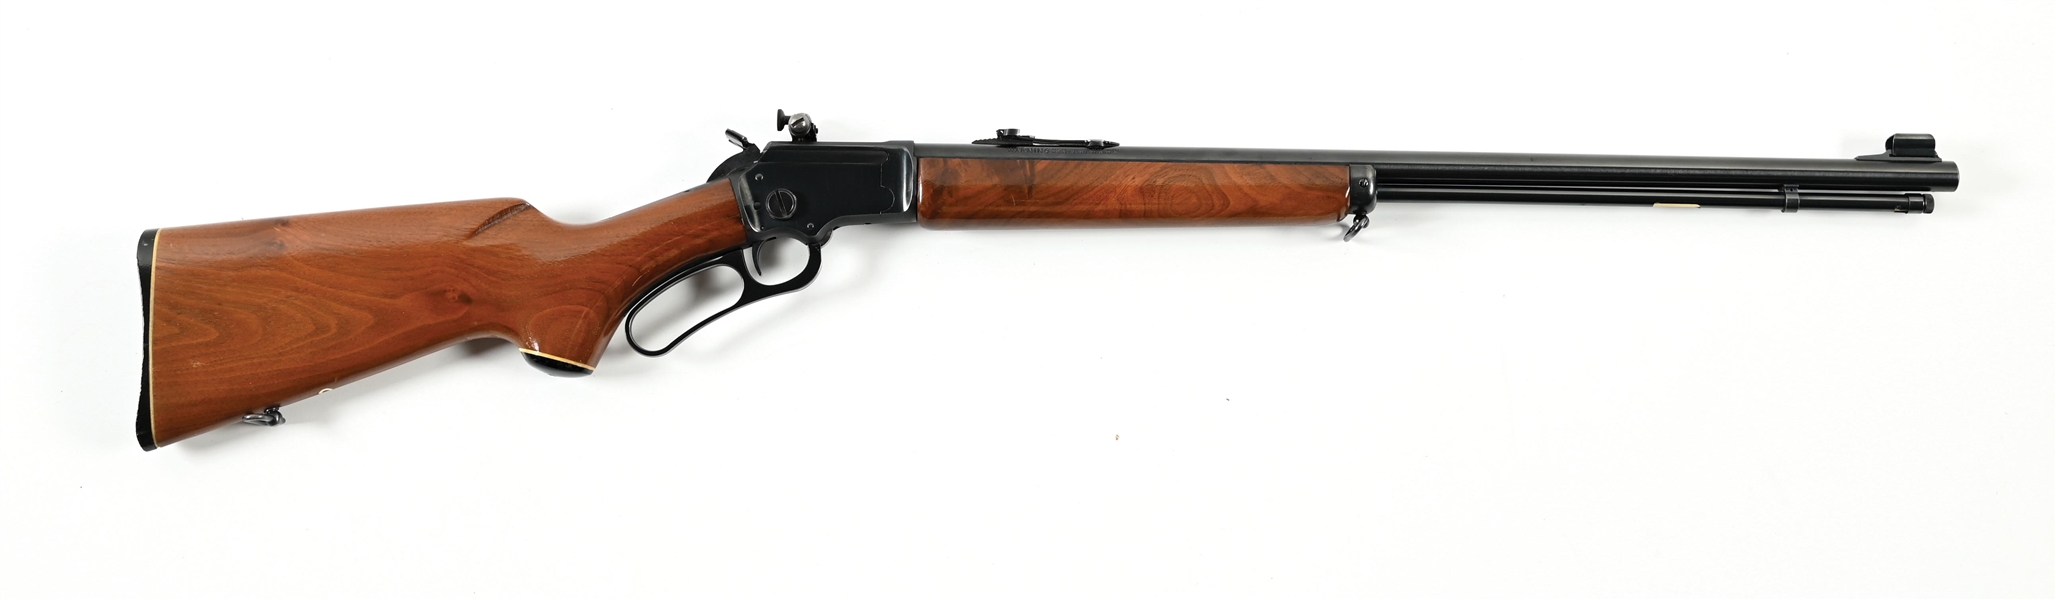 (M) MARLIN MODEL ORIGINAL GOLDEN 39A LEVER ACTION RIFLE WITH BOX.